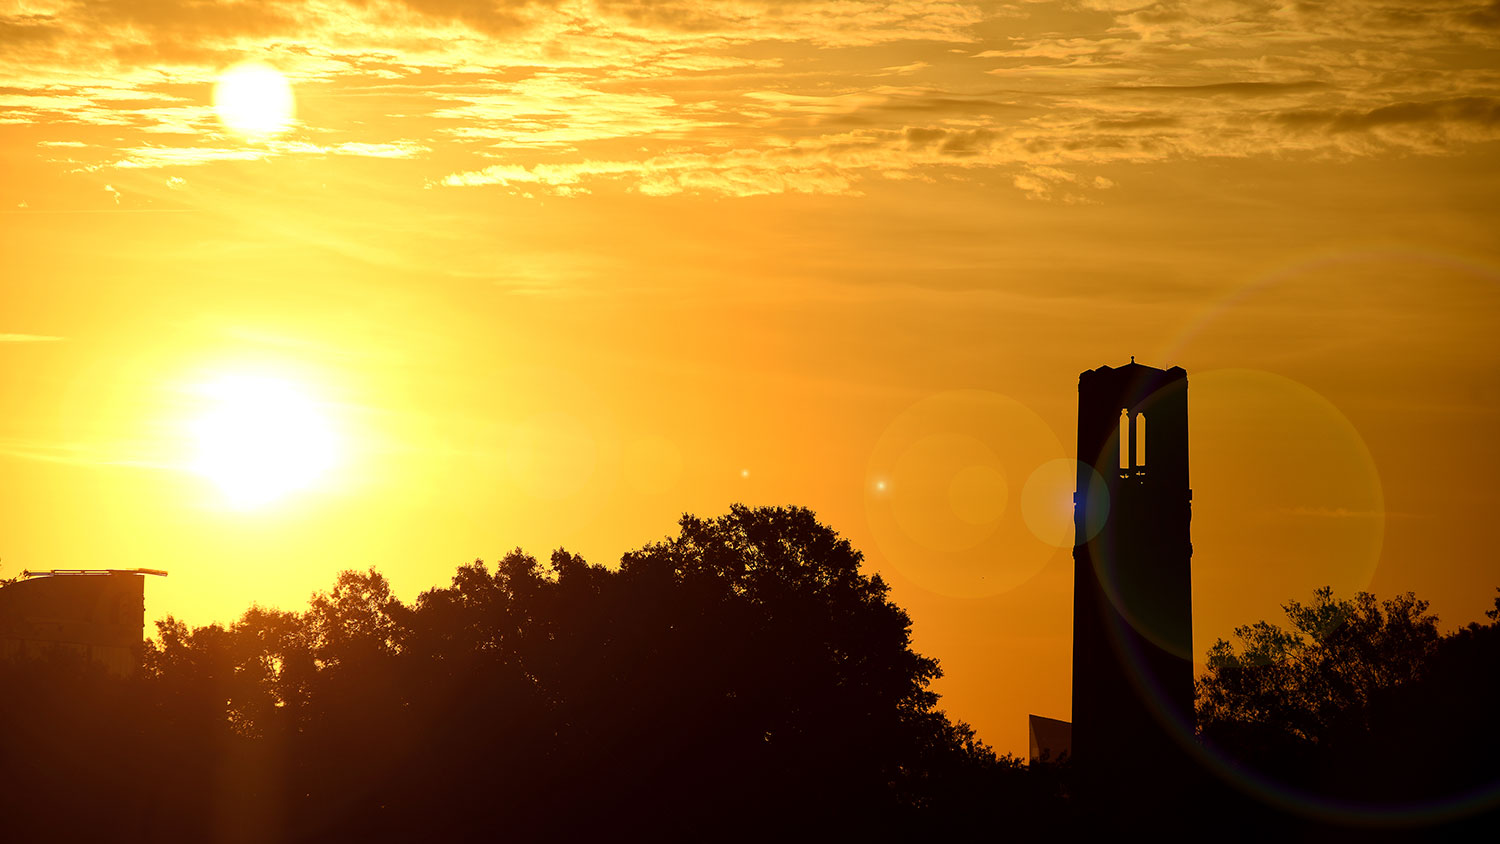 NC State's belltower with the rising sun